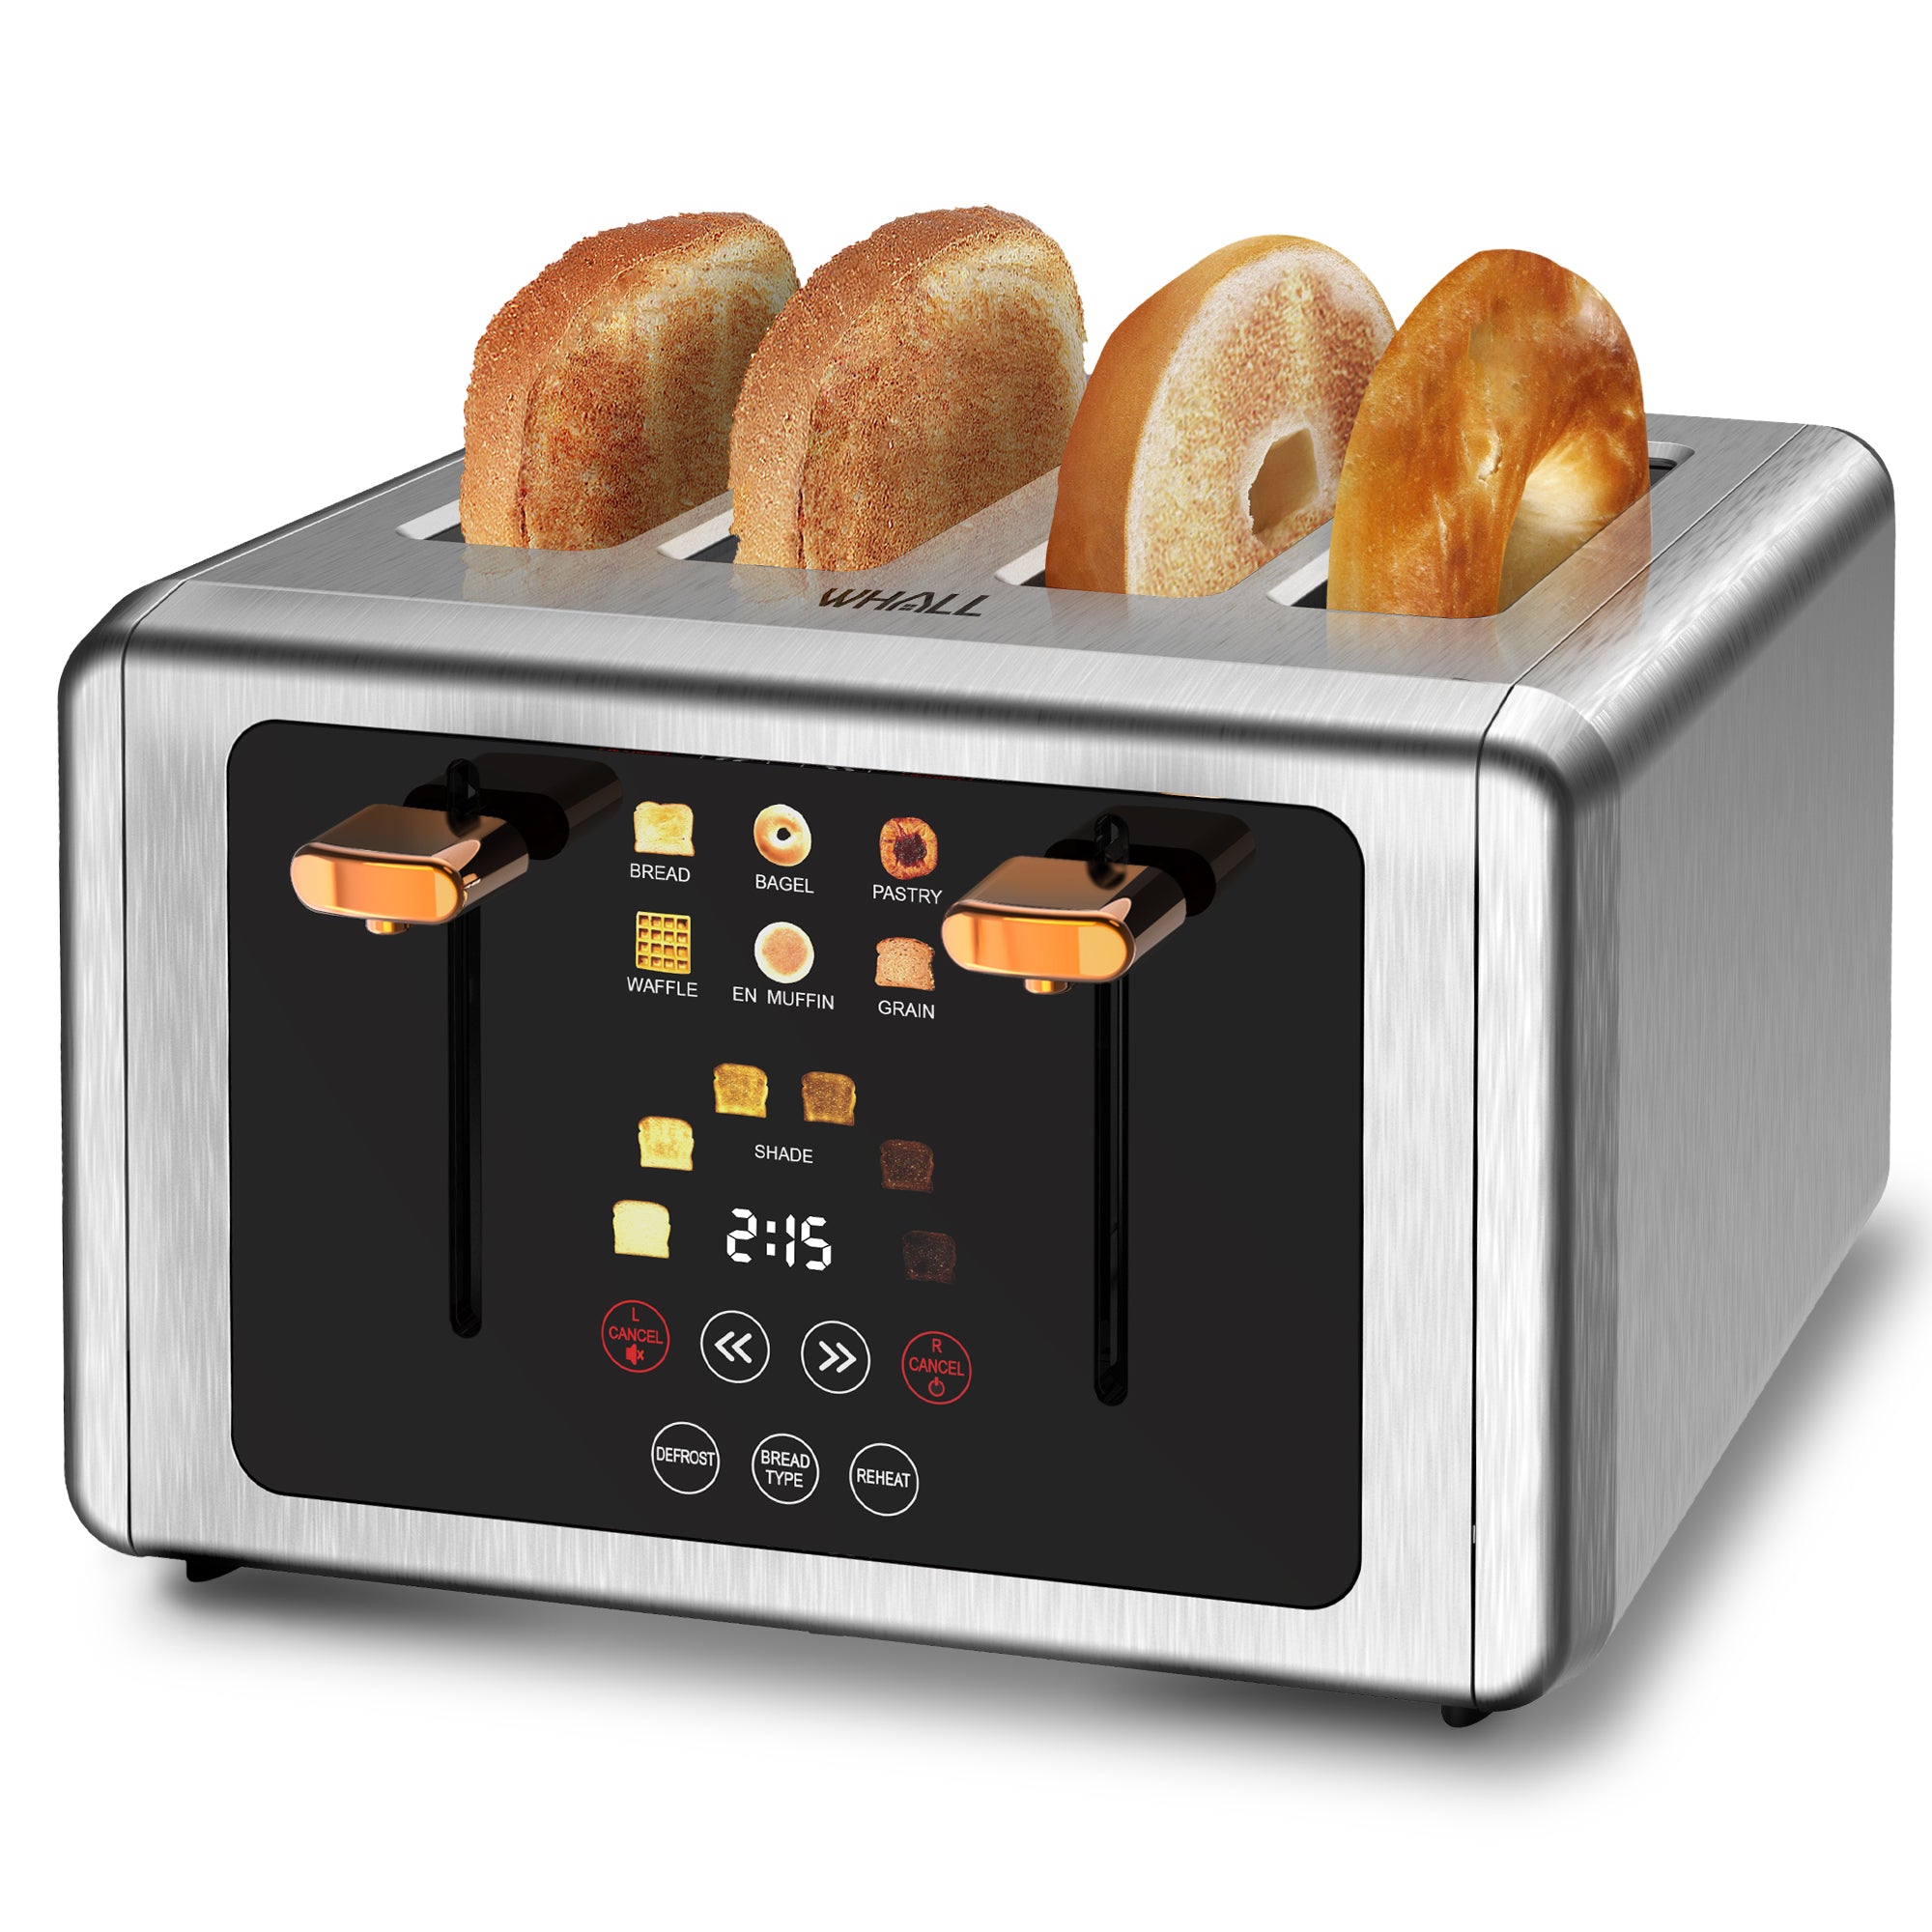 WHALL® Touch Screen Toaster 4 Slice, Stainless Steel Digital Timer Toaster, 6 Bread Types & 6 Shade Settings, Smart Extra Wide Slots Toaster With Bagel, Cancel, Defrost Functions,Sliver Lever